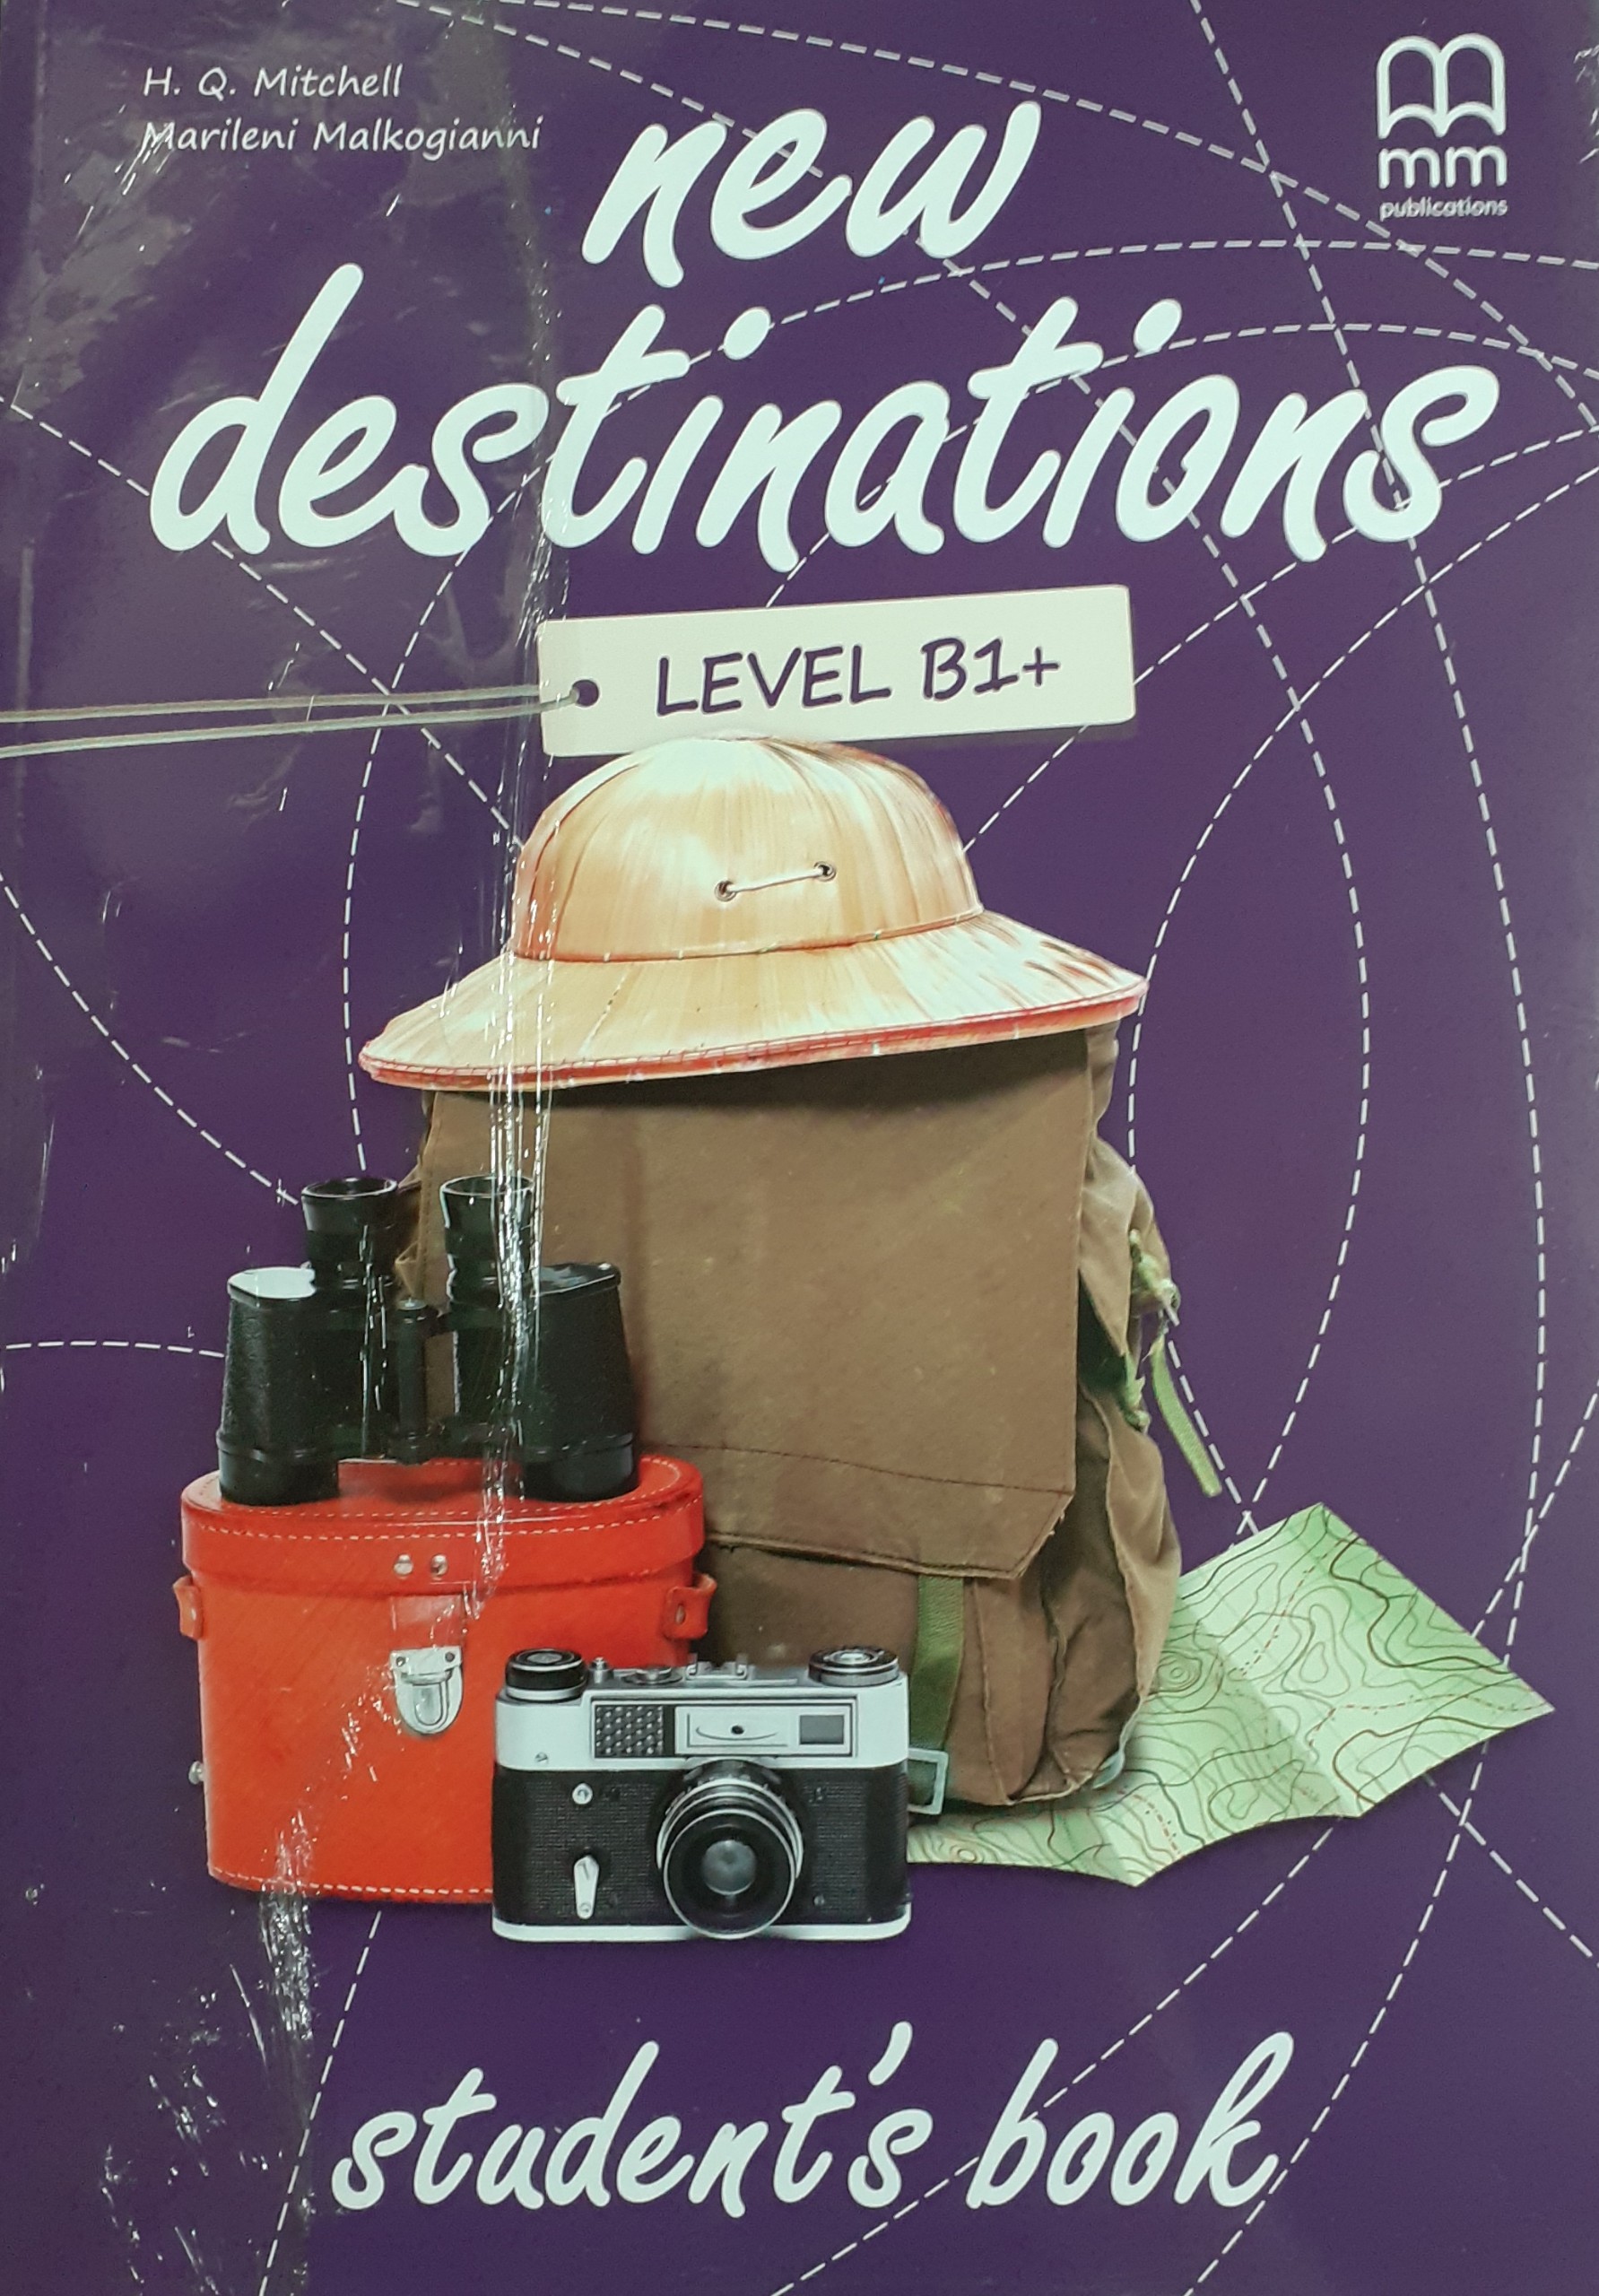 MM Publications: Sách học tiếng Anh - New Destinations Level B1+ Student's Book (British Edition)